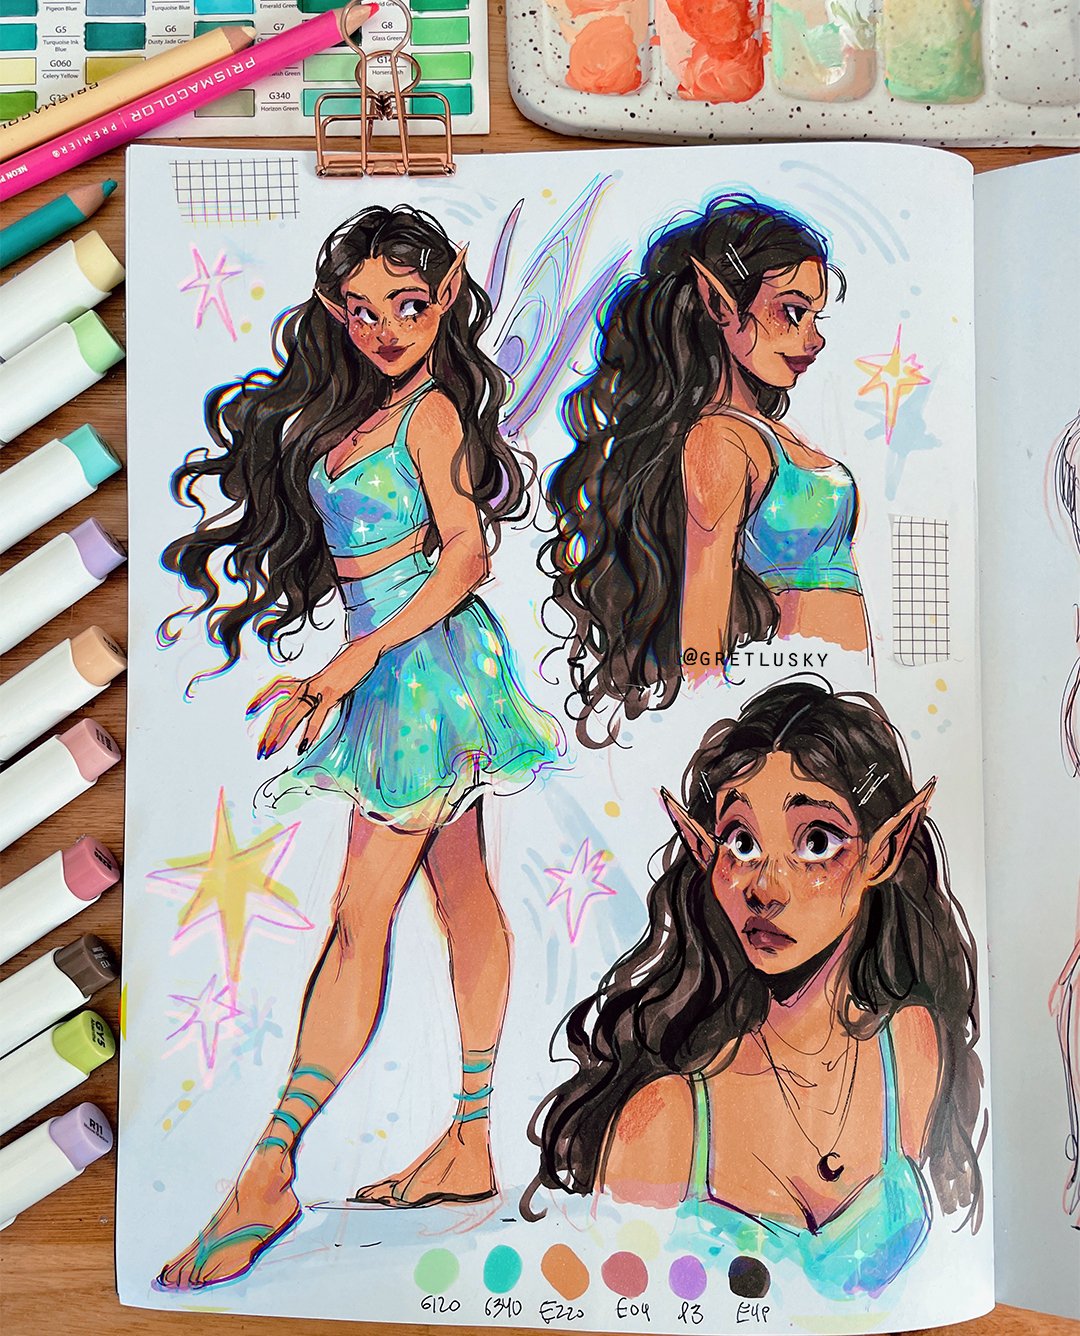 Gretel Lusky's Instagram post: “A sketchbook page I created using  @spectrumnoir alcohol markers and fineliners ✨ I abso…